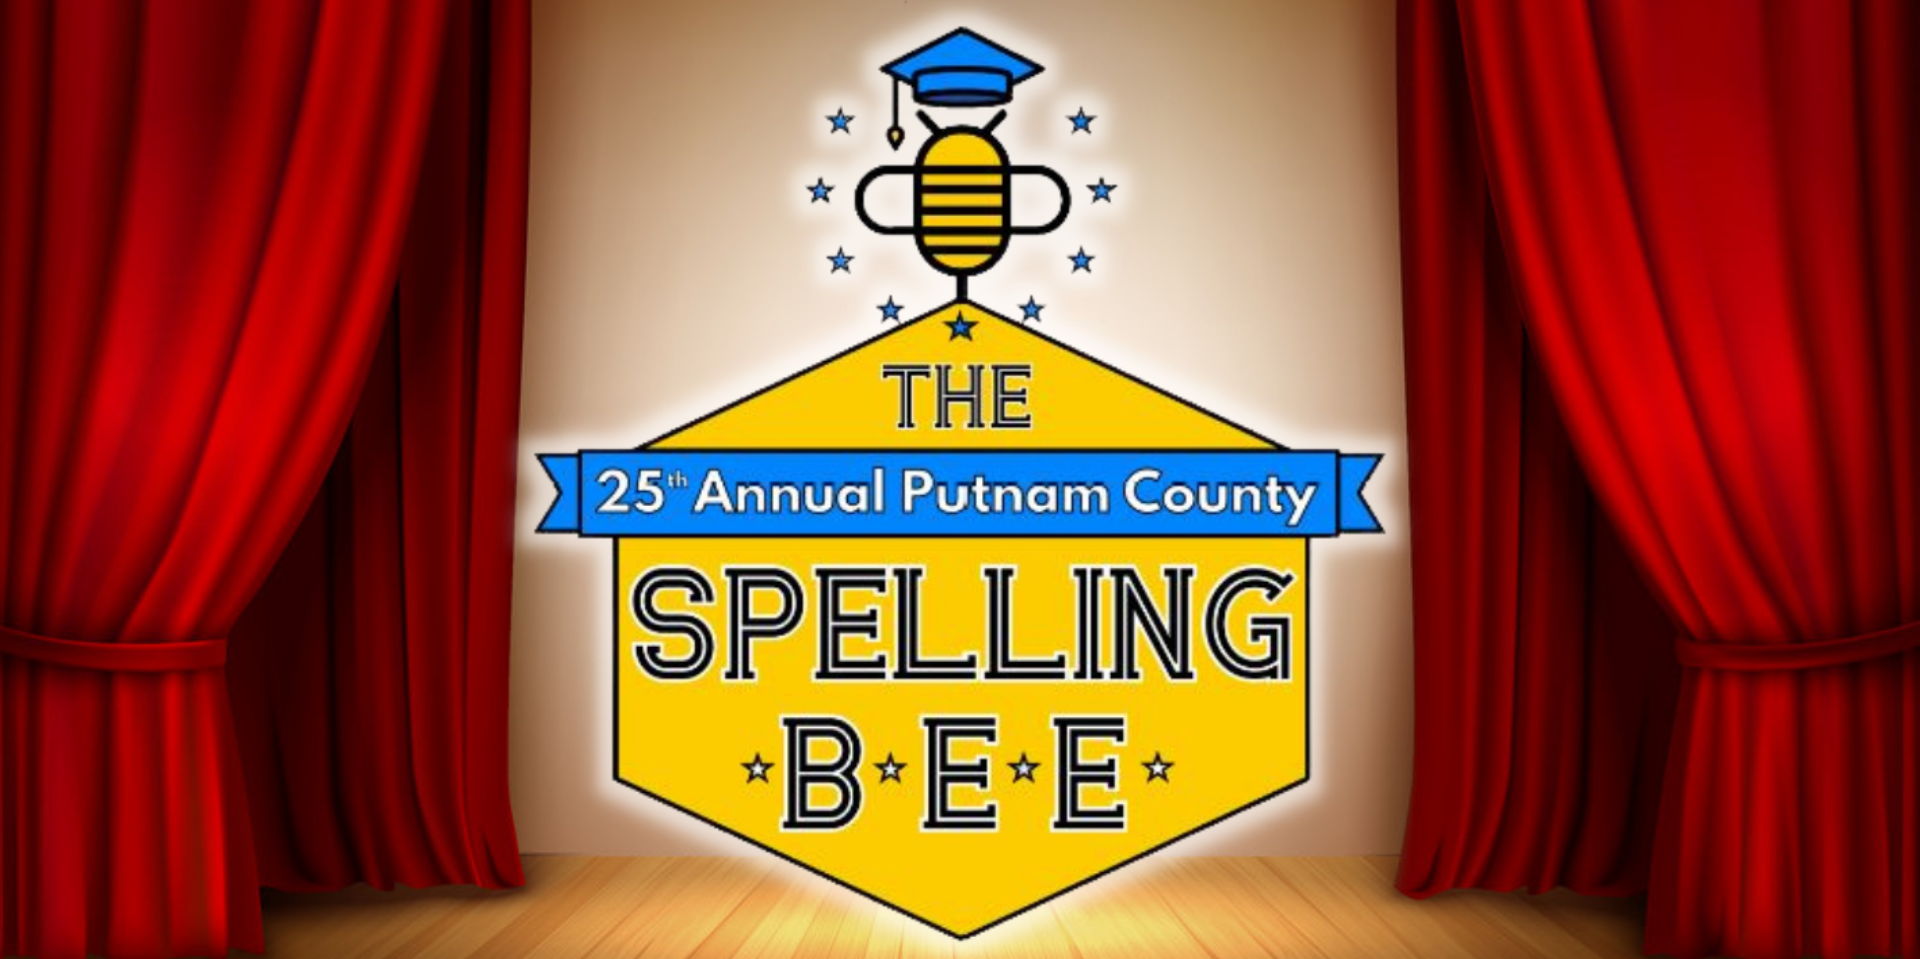 The 25th Annual Putnam County Spelling Bee promotional image